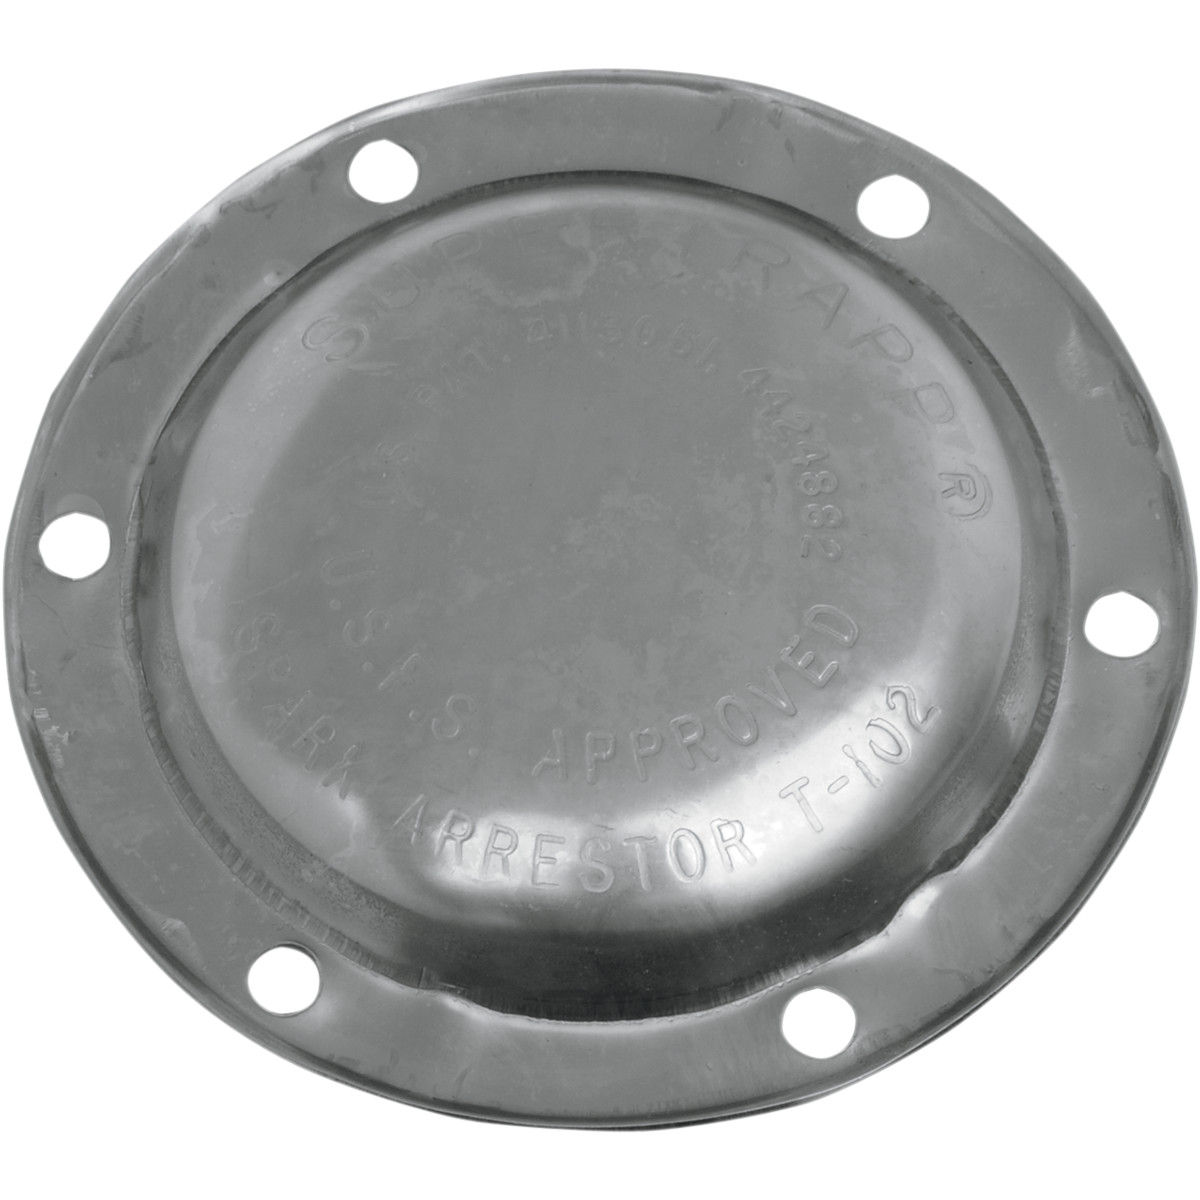 HARLEY DAVIDSON END CAP CLOSED (FOR 4" DISCS) POLISHED STAINLESS STEEL